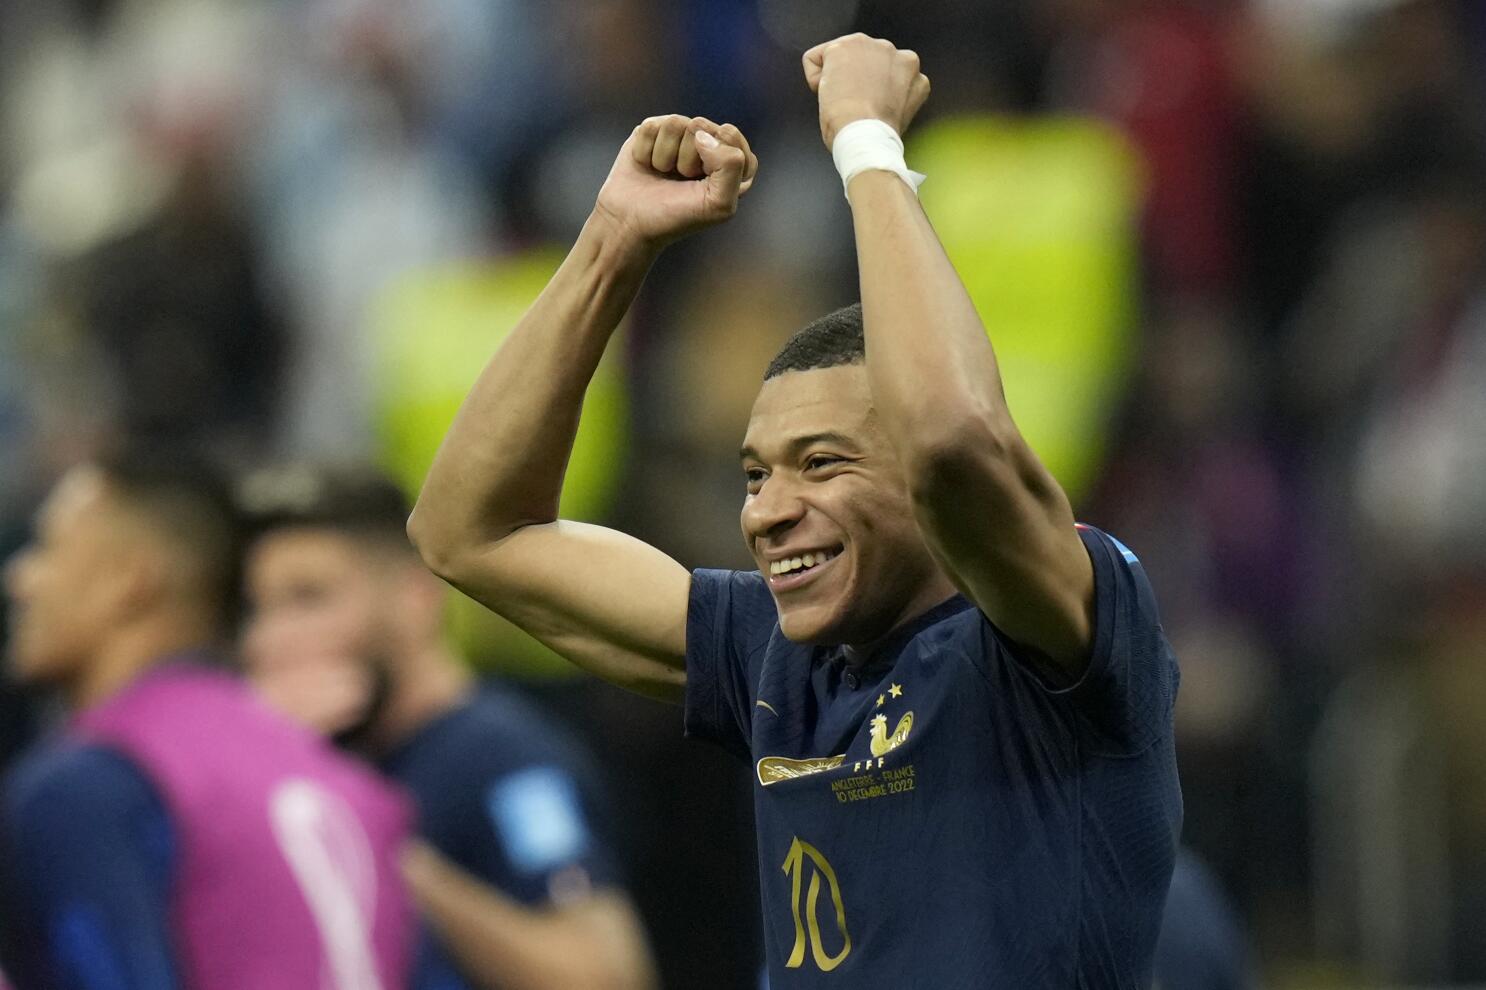 Mbappé laughs, shows his joy as World Cup history beckons - The